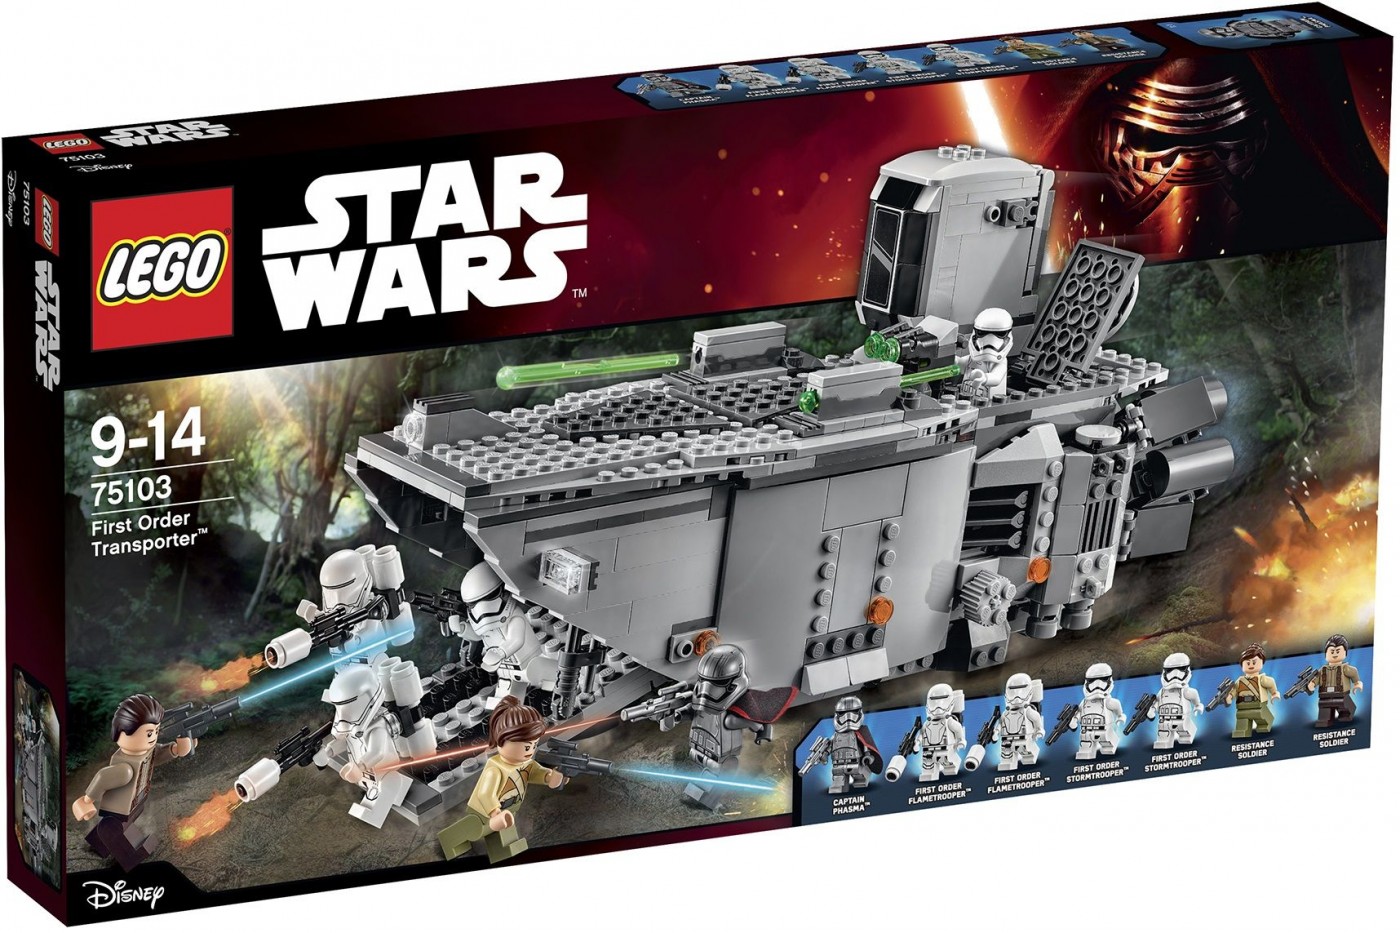 Upcoming LEGO Star Wars The Force Awakens 2015 Sets | Geek Culture